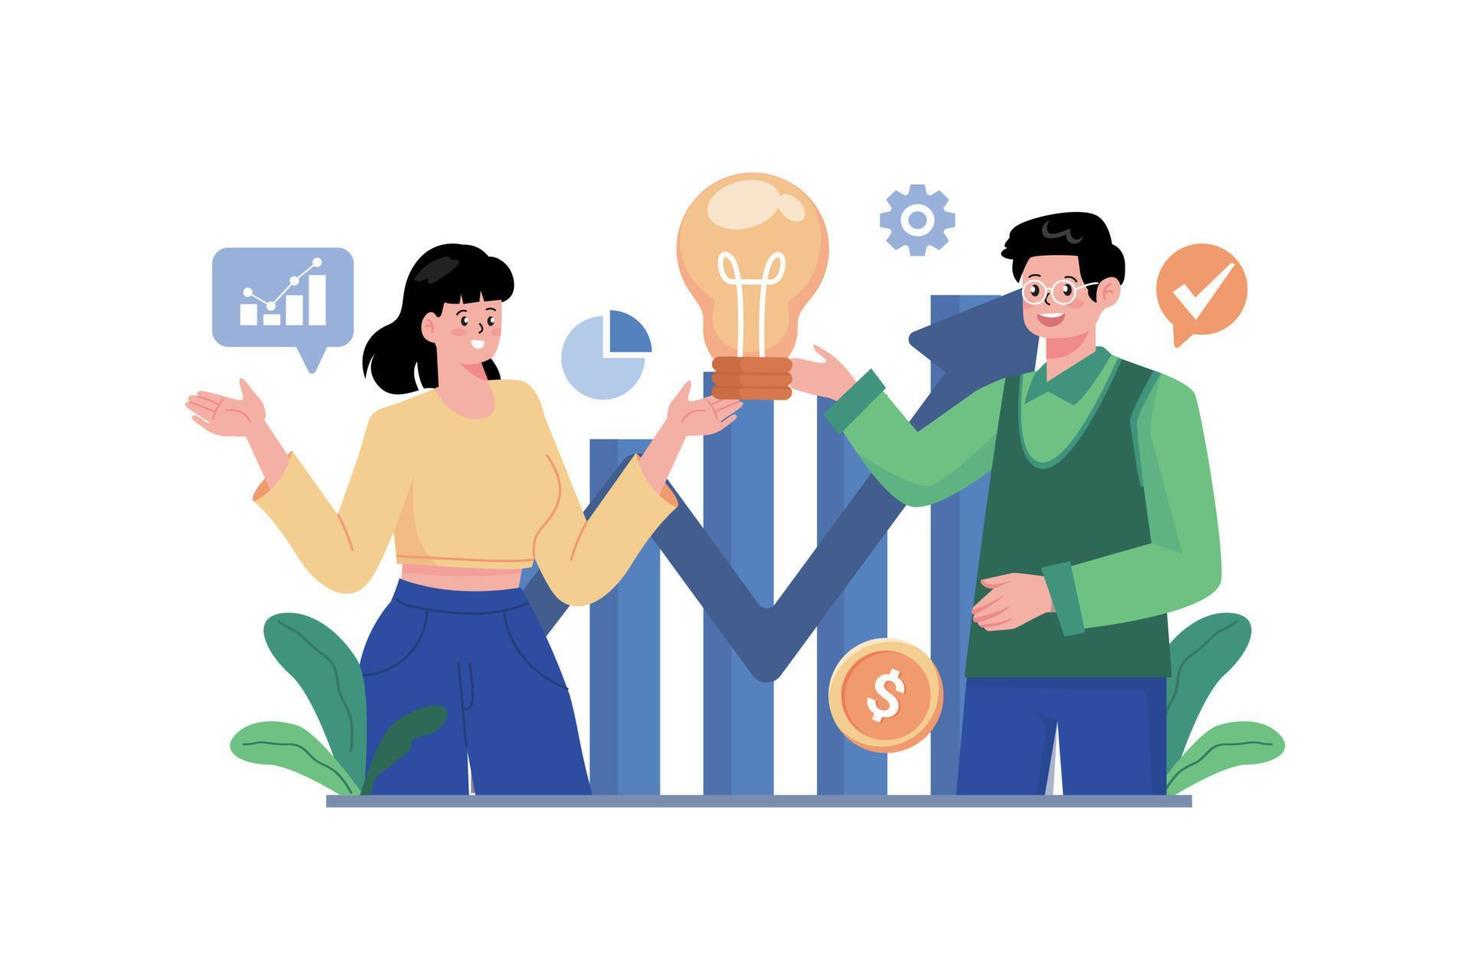 Meet Friends Co-Workers Illustration concept on white background vector